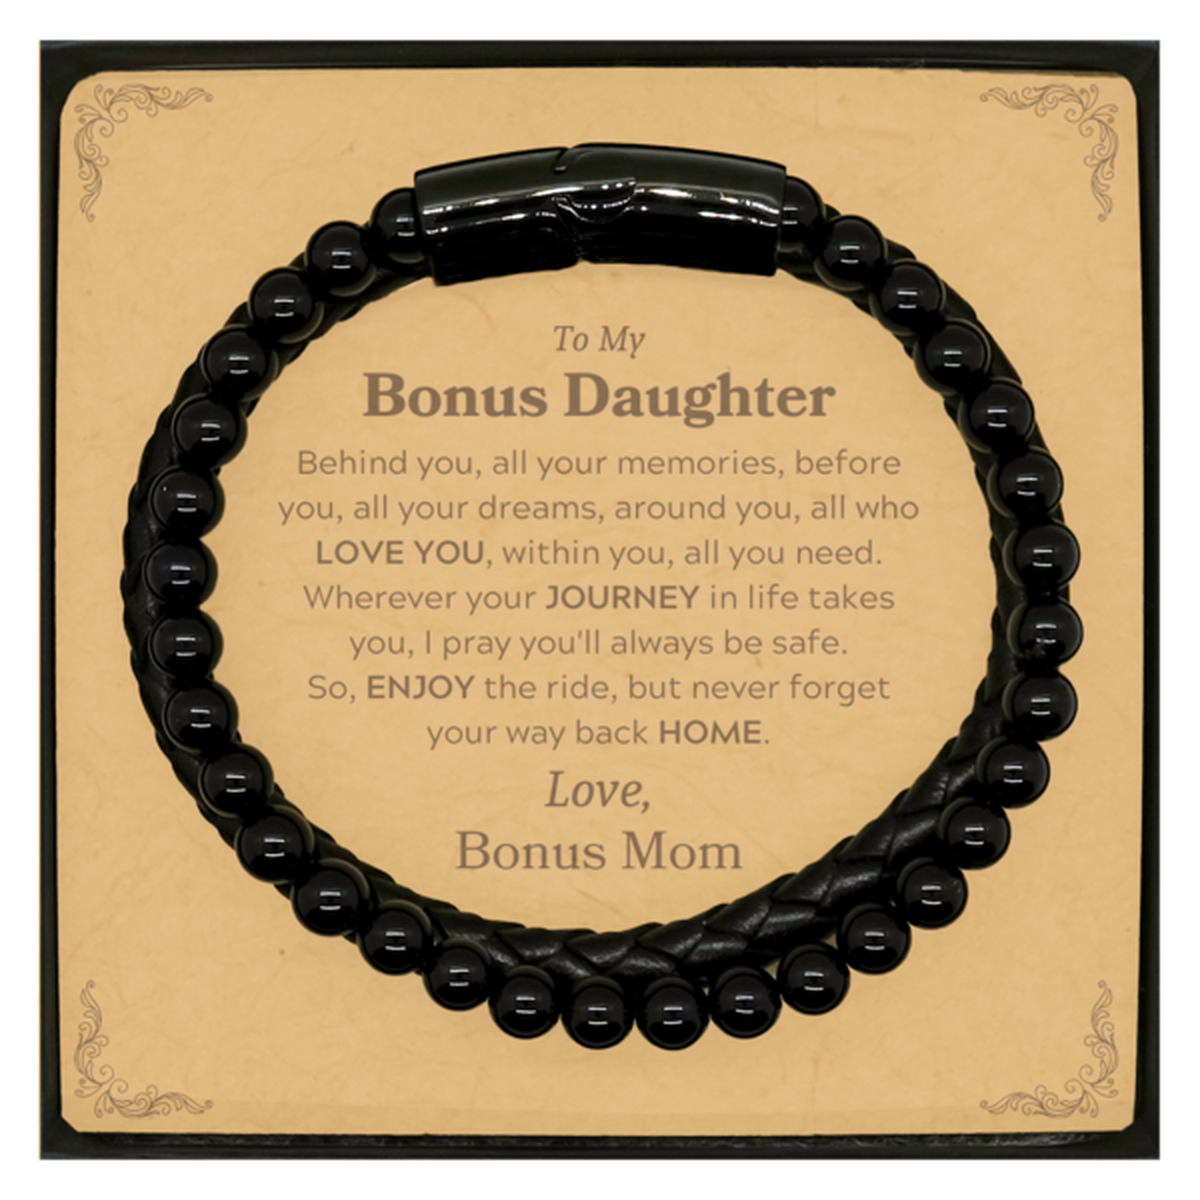 To My Bonus Daughter Graduation Gifts from Bonus Mom, Bonus Daughter Stone Leather Bracelets Christmas Birthday Gifts for Bonus Daughter Behind you, all your memories, before you, all your dreams. Love, Bonus Mom